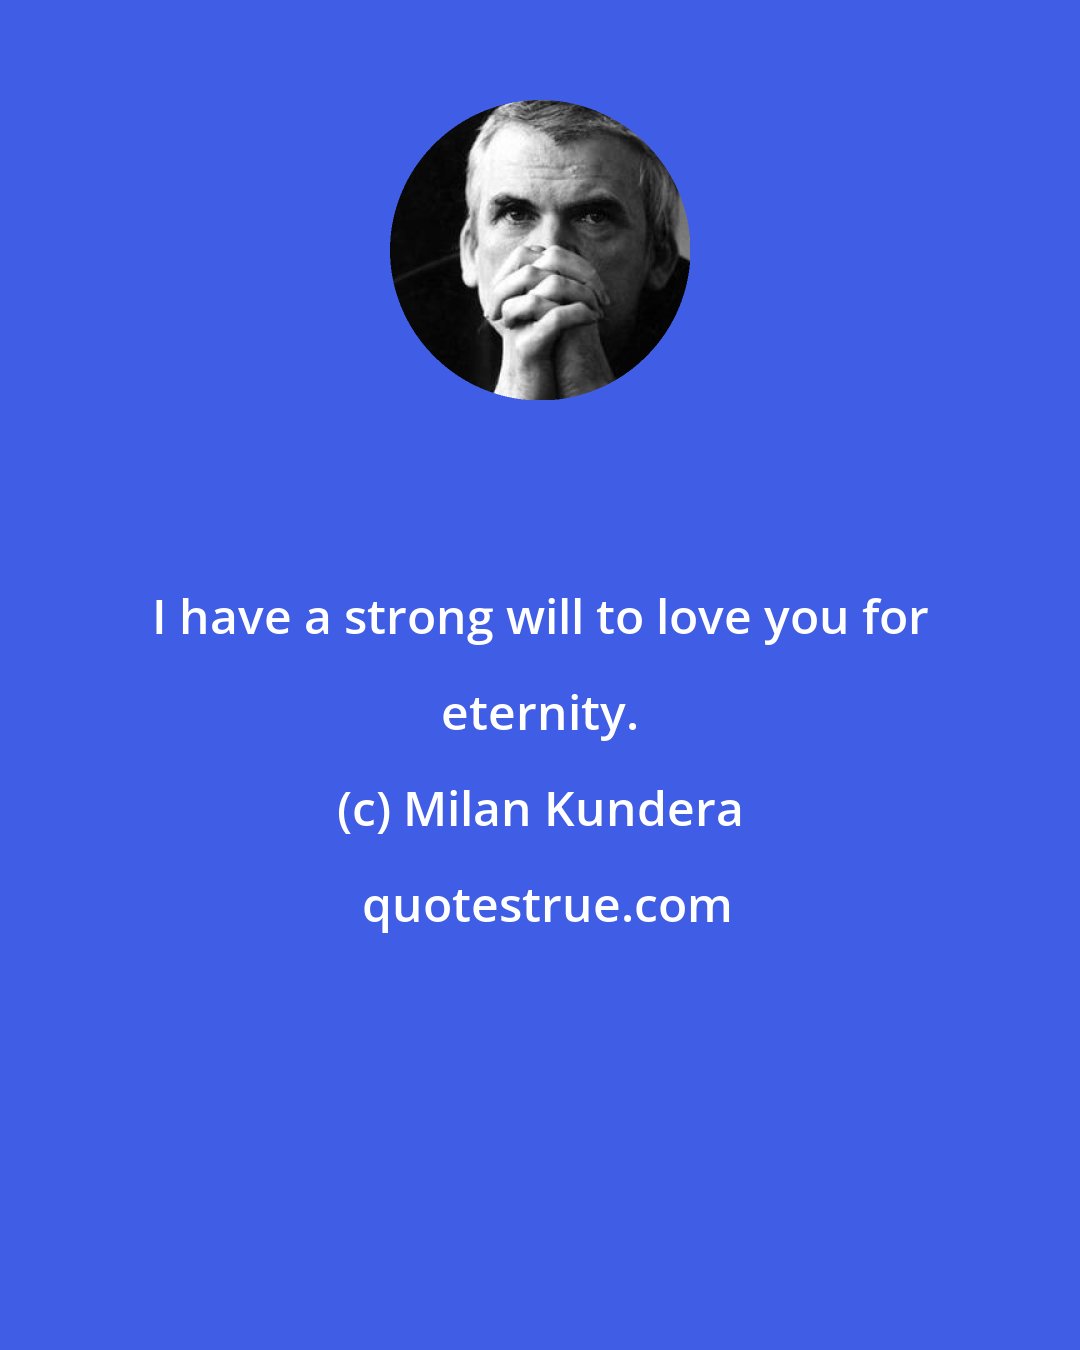 Milan Kundera: I have a strong will to love you for eternity.